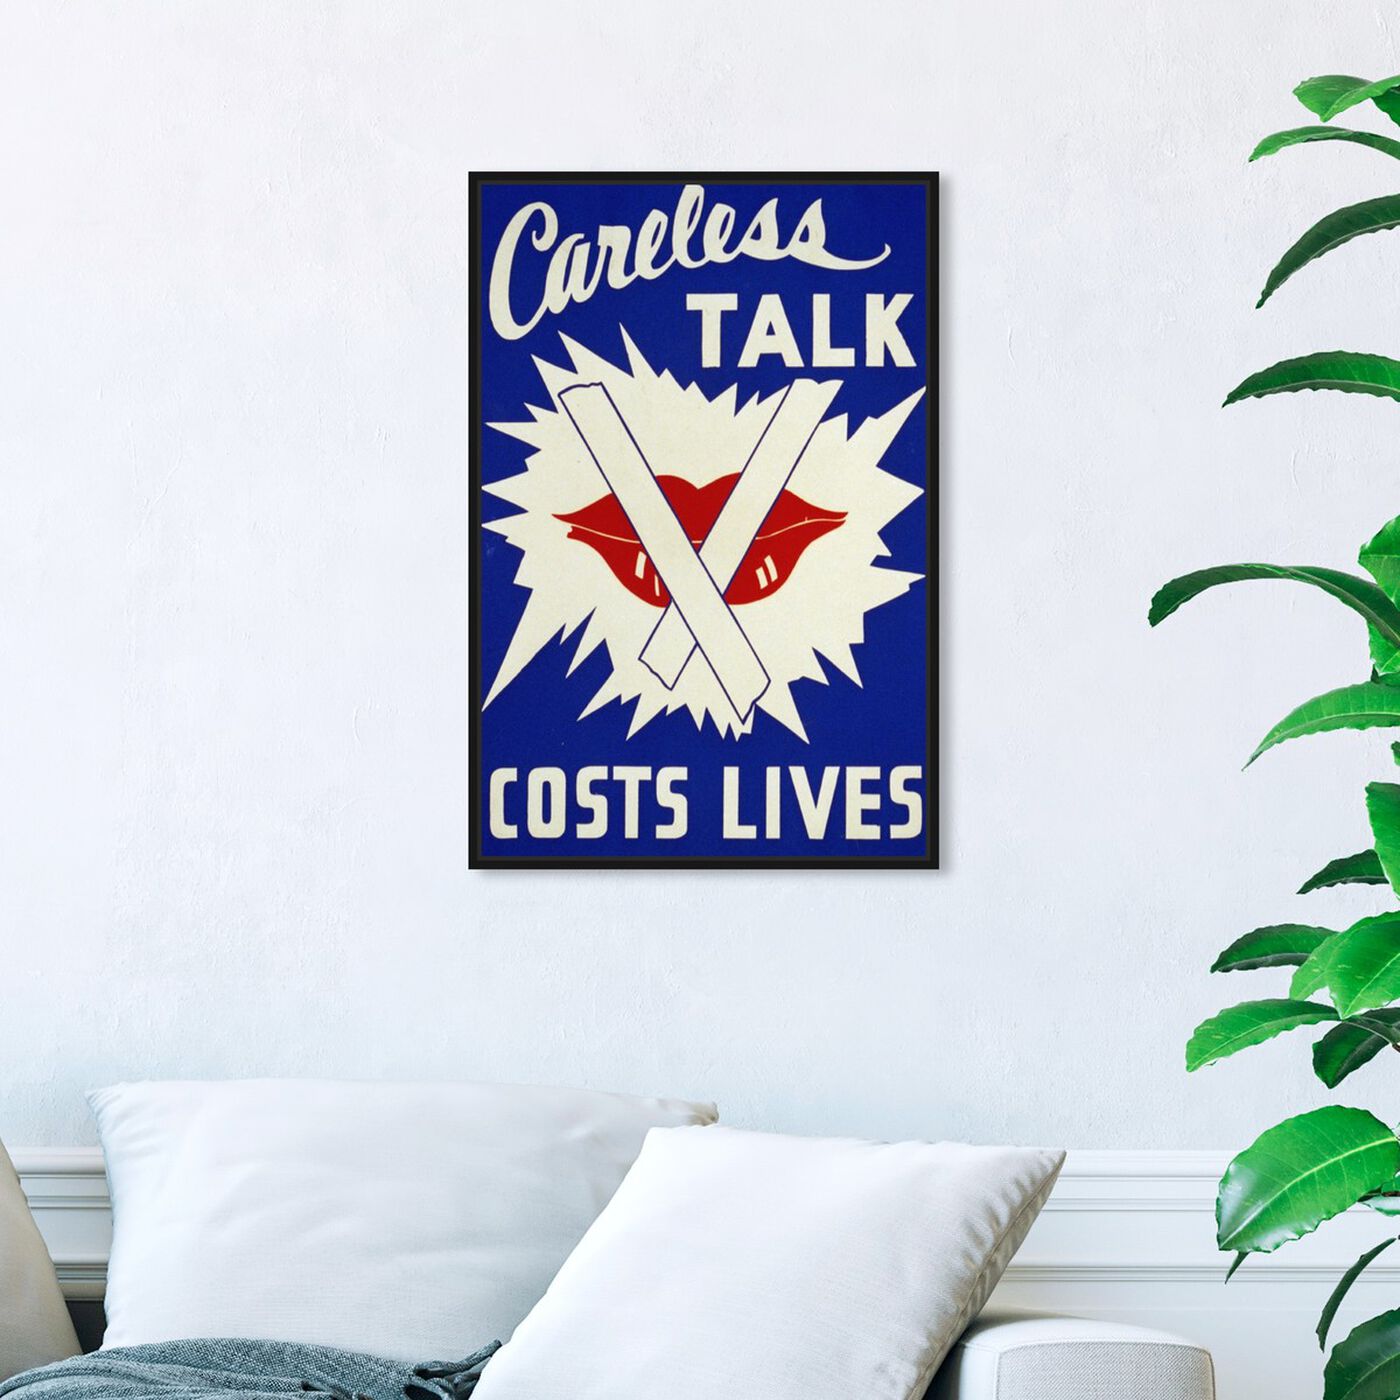 Hanging view of Careless Talk featuring advertising and posters art.